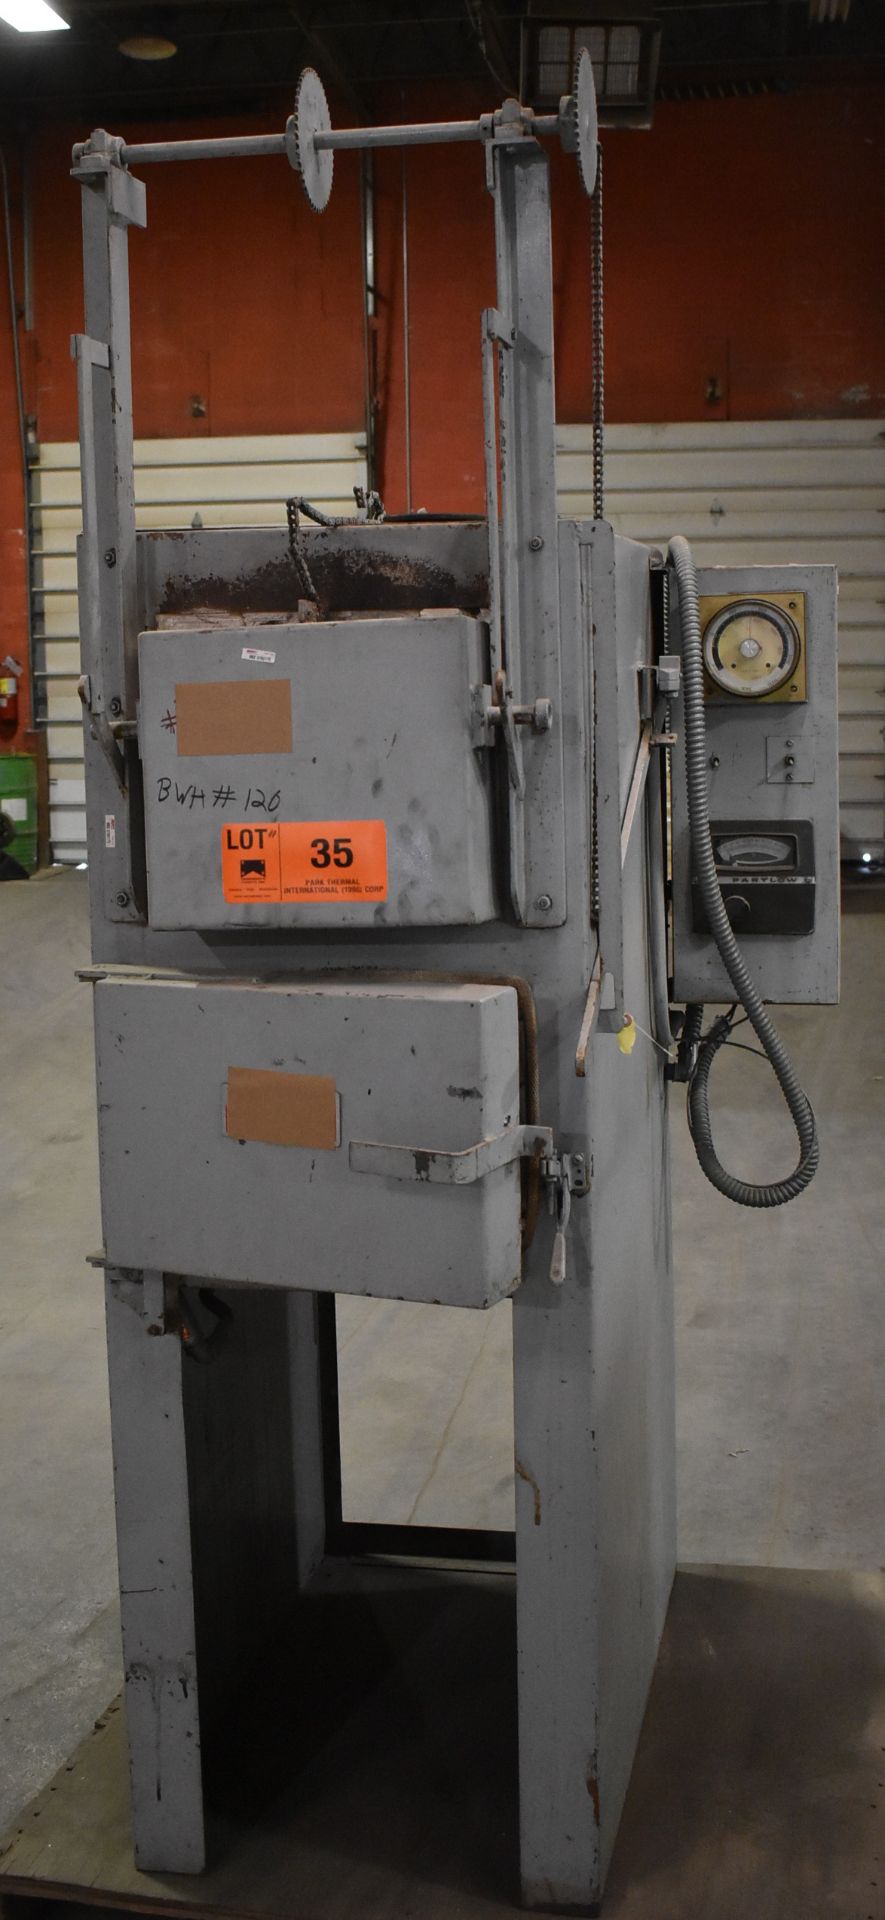 LUCIFER DL-8008-C ELECTRIC BOX FURNACE WITH 2000 DEG. F. MAX. TEMPERATURE, 10 KW, DUAL